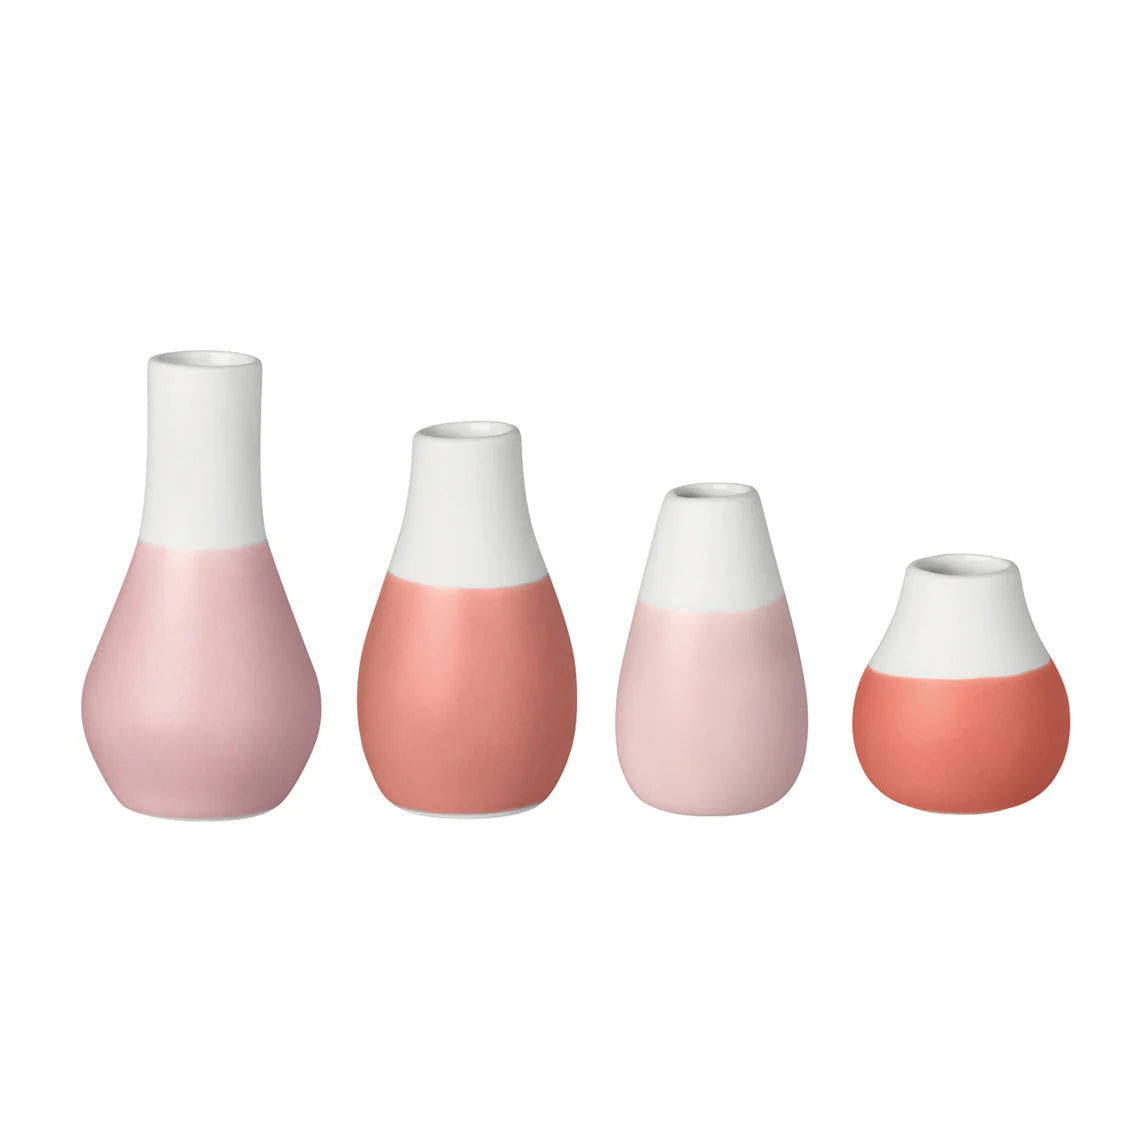 Pastel Two-Tone Mini Vases -  Shades Of Red Vases